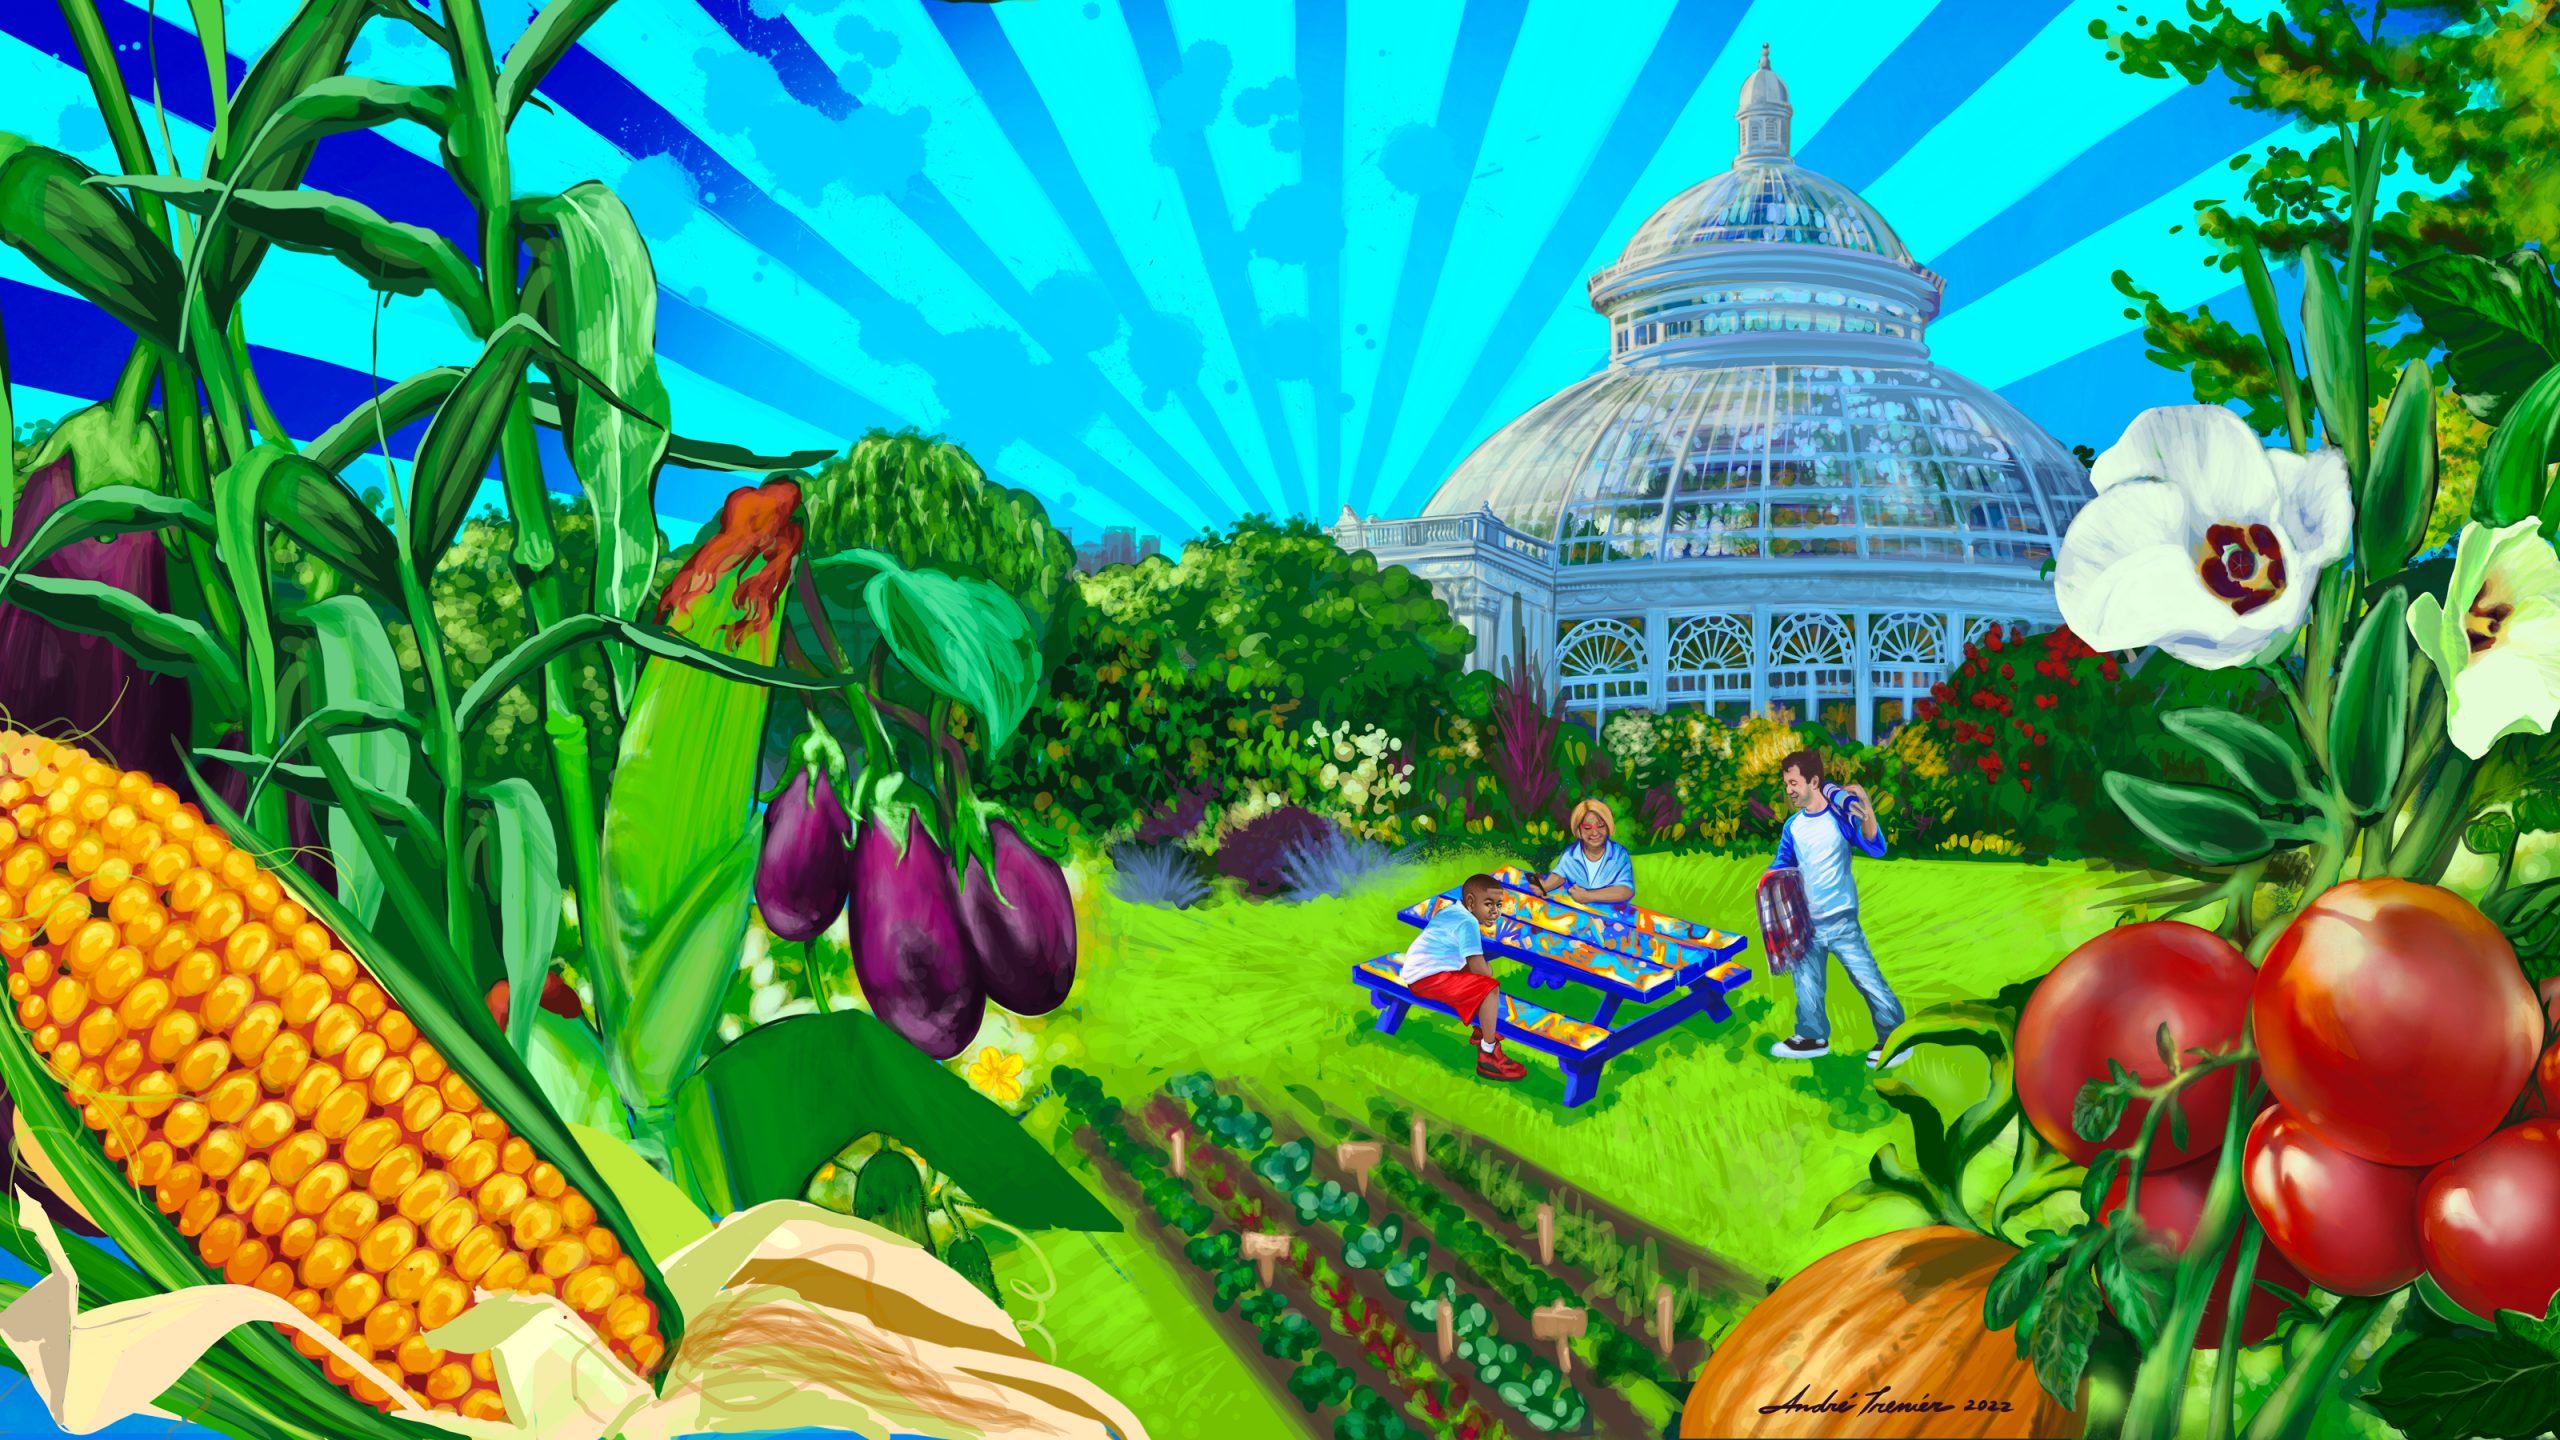 Illustration of large yellow corn in the left corner with tall corn stalks, purple eggplant hanging next to the corn stalks over green grass and colorful representation of three rows of crops. A swirlly painted picnic table is next to the crops with three people, two are seated, one looking at a phone and one is standing walking toward them. Behind them is a large glass Conservatory dome and the sky is rendered in bright blue and darker blue strips that all point down toward the dome. On the right side are a pumpkin, bright red tomatoess hanging from a vine, and a white flower with a purple inside with green flowers and leaves along the side. The illustration is signed by Andre Trenier, 2022.